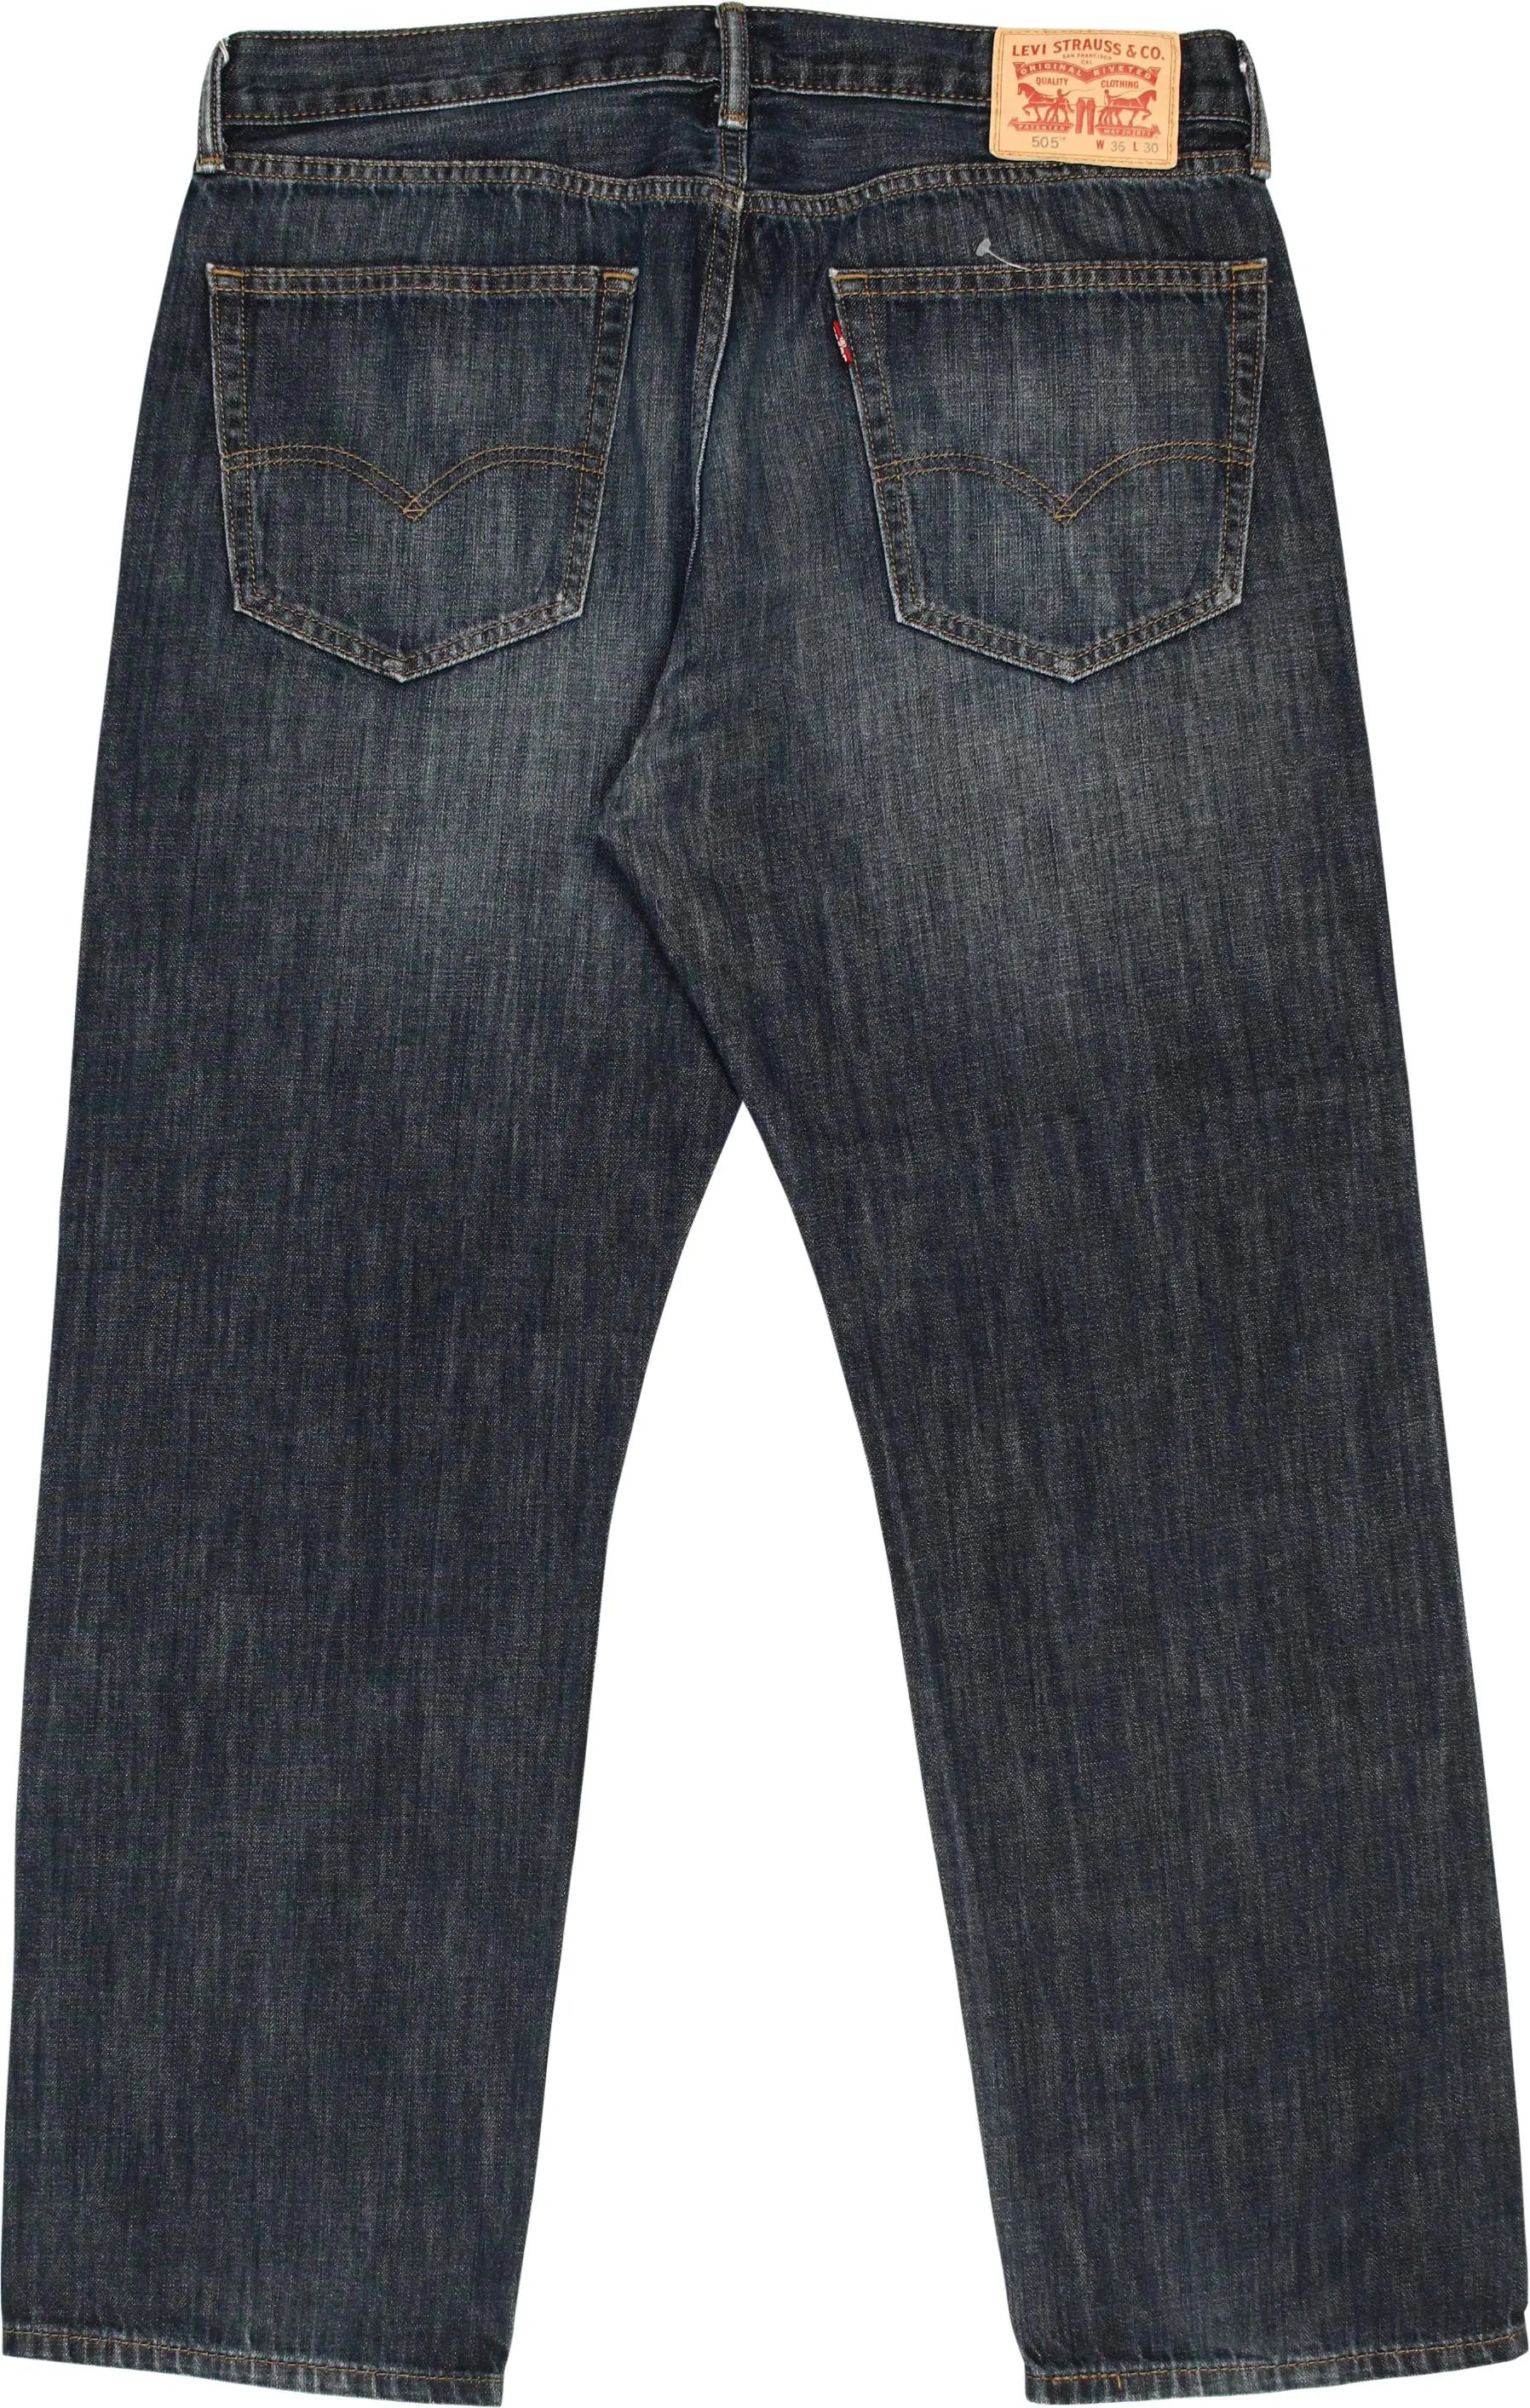 Levi's - Levi's 505 Regular Fit Jeans- ThriftTale.com - Vintage and second handclothing